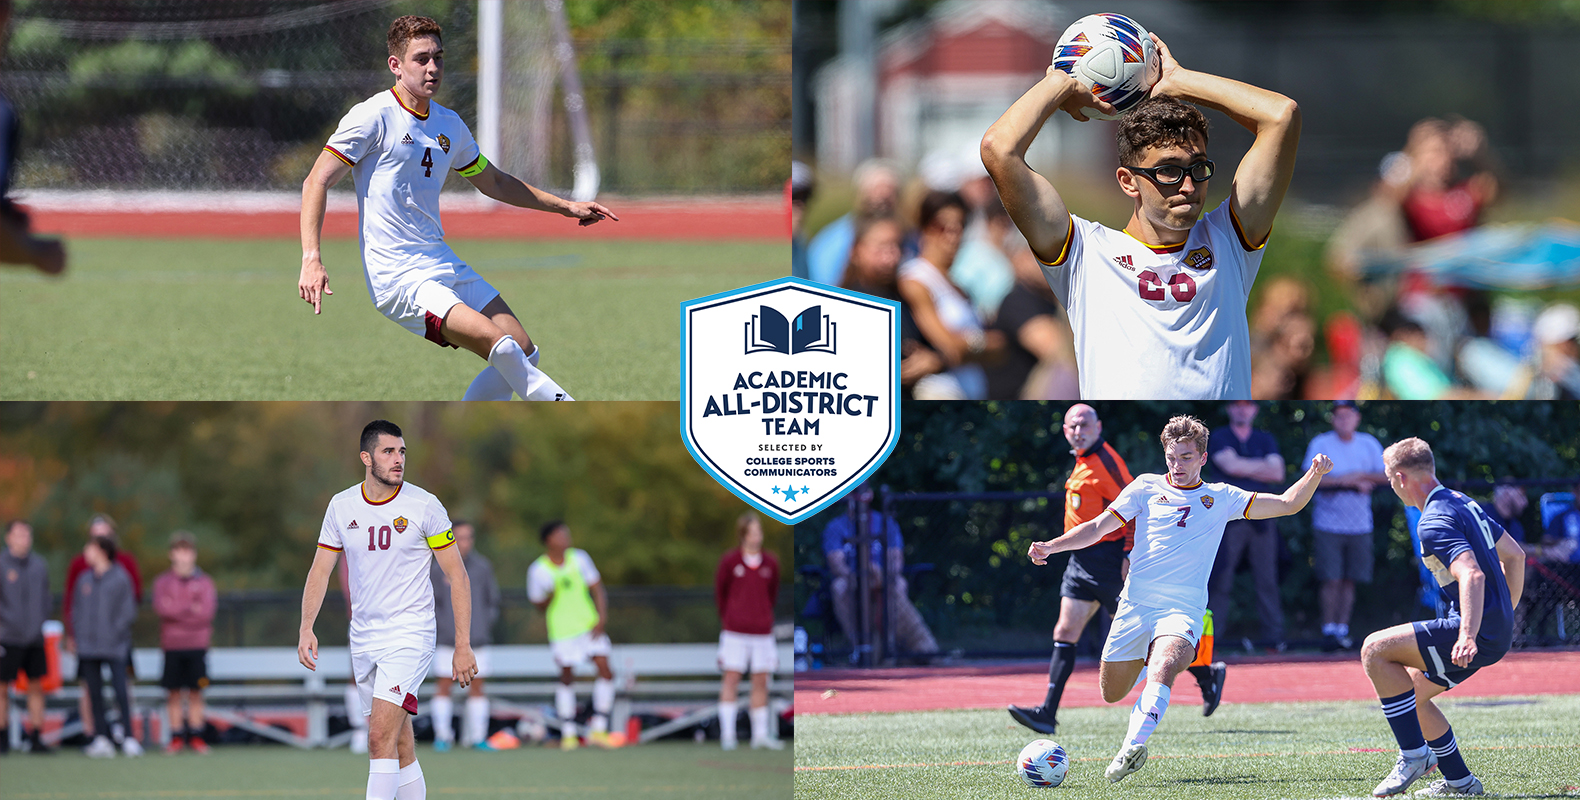 Regis MSOC Players Named College Sports Communicators Academic All-District